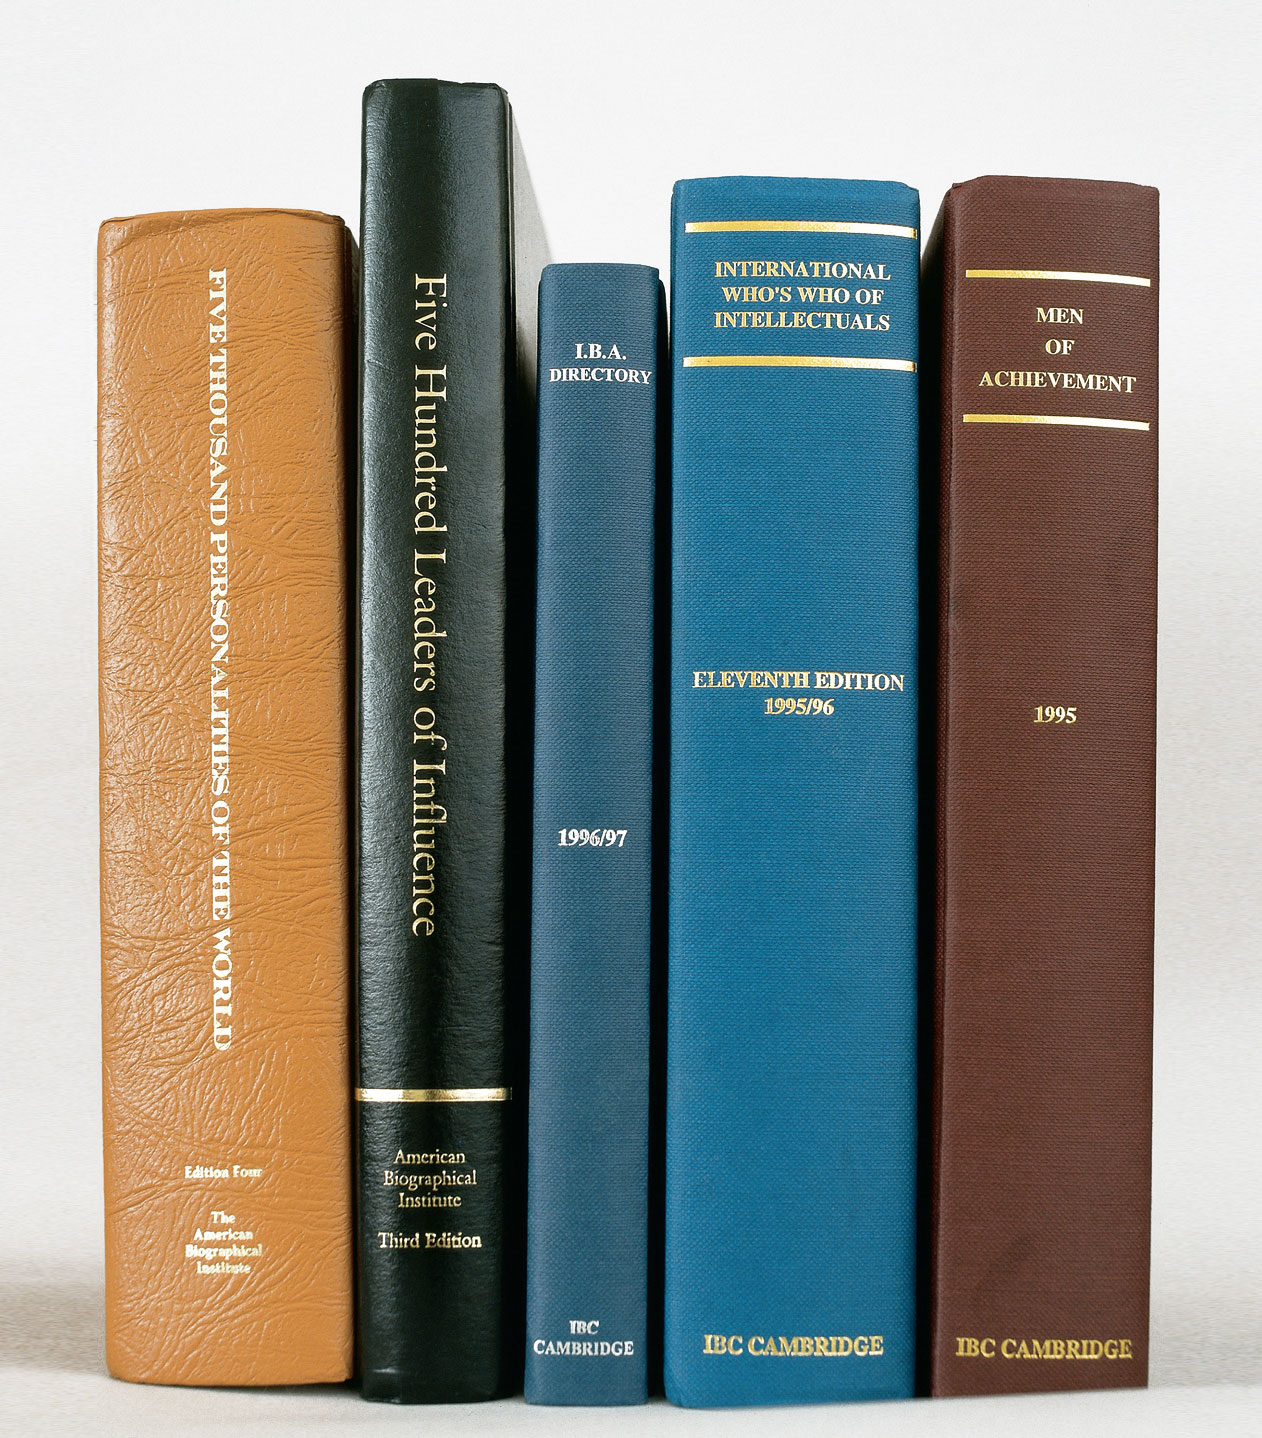 A photograph of five books, including “Men of achievement” and ”Five Hundered Leaders of Influence.”